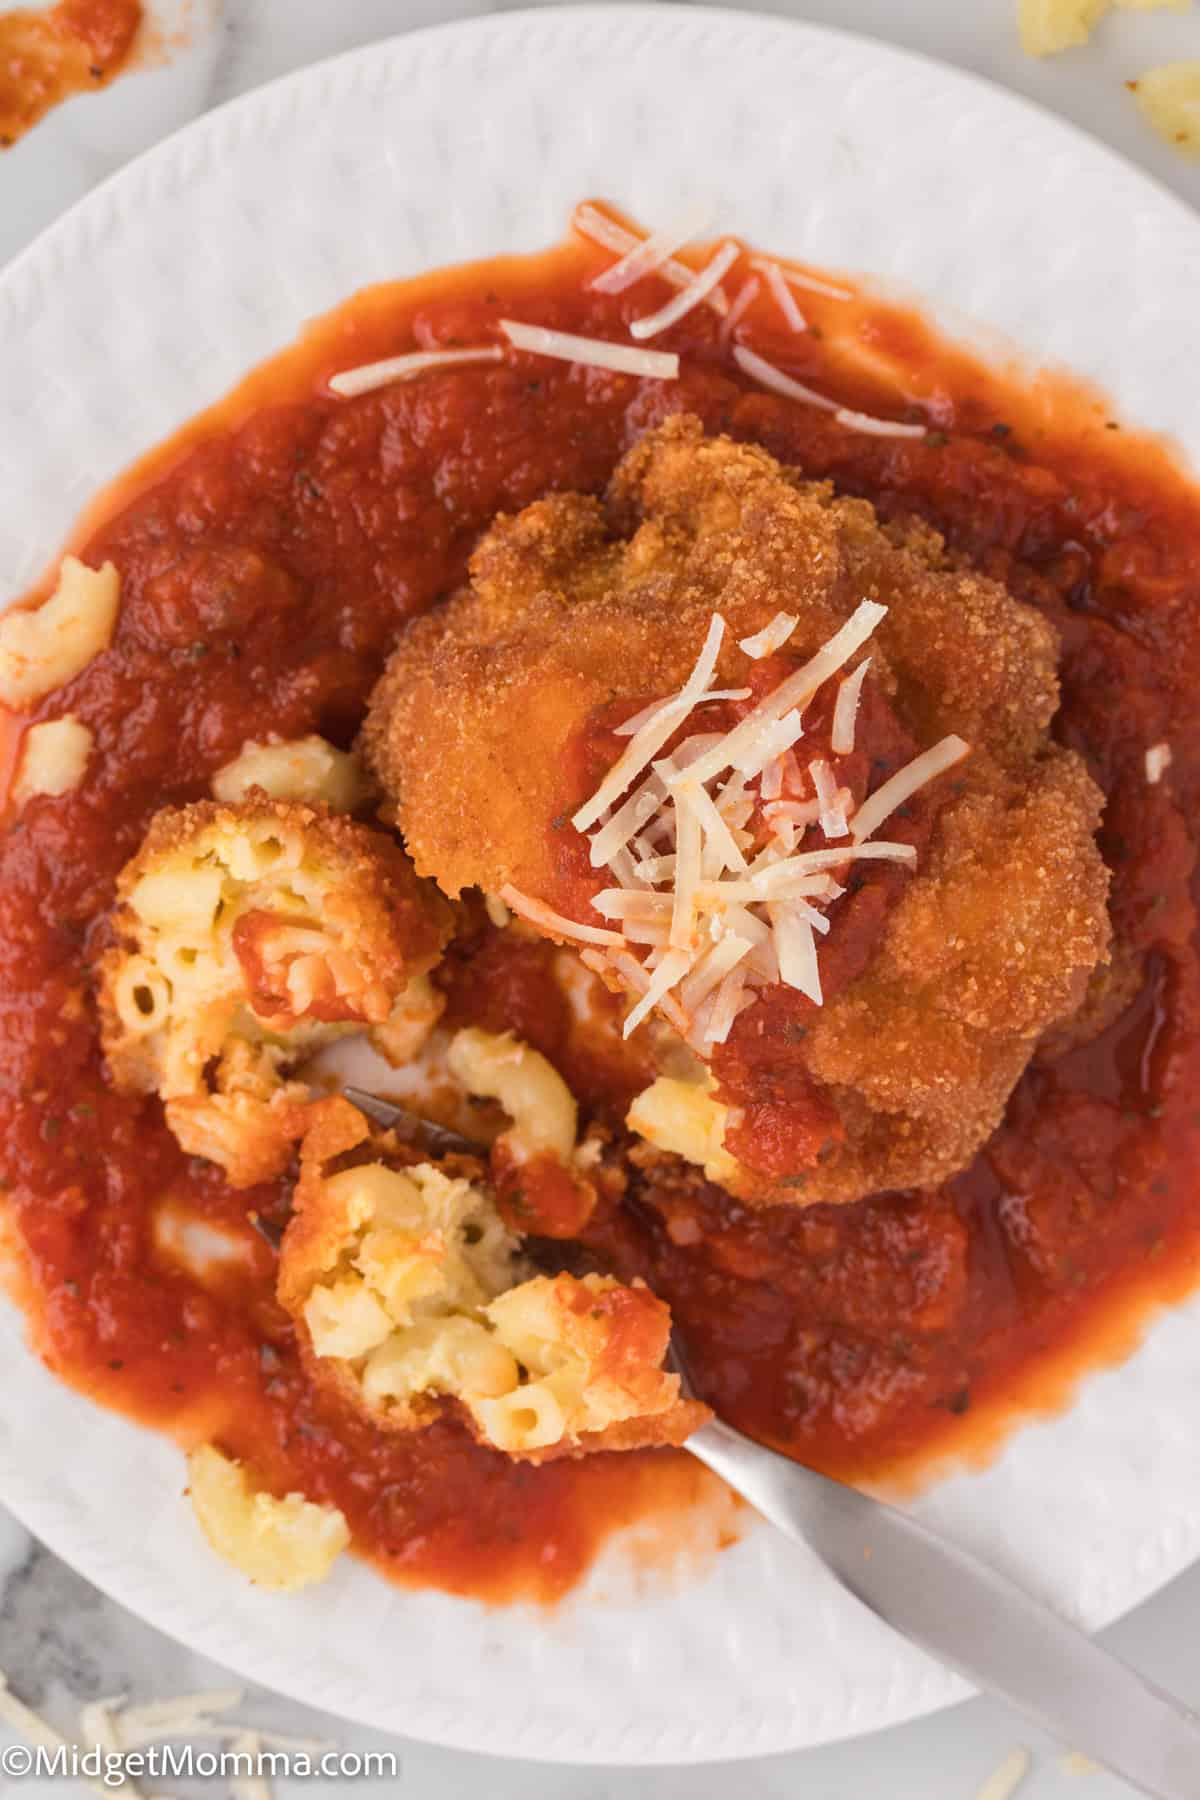 A plate of macaroni and cheese balls with marinara sauce, topped with shredded cheese, served on a white plate 